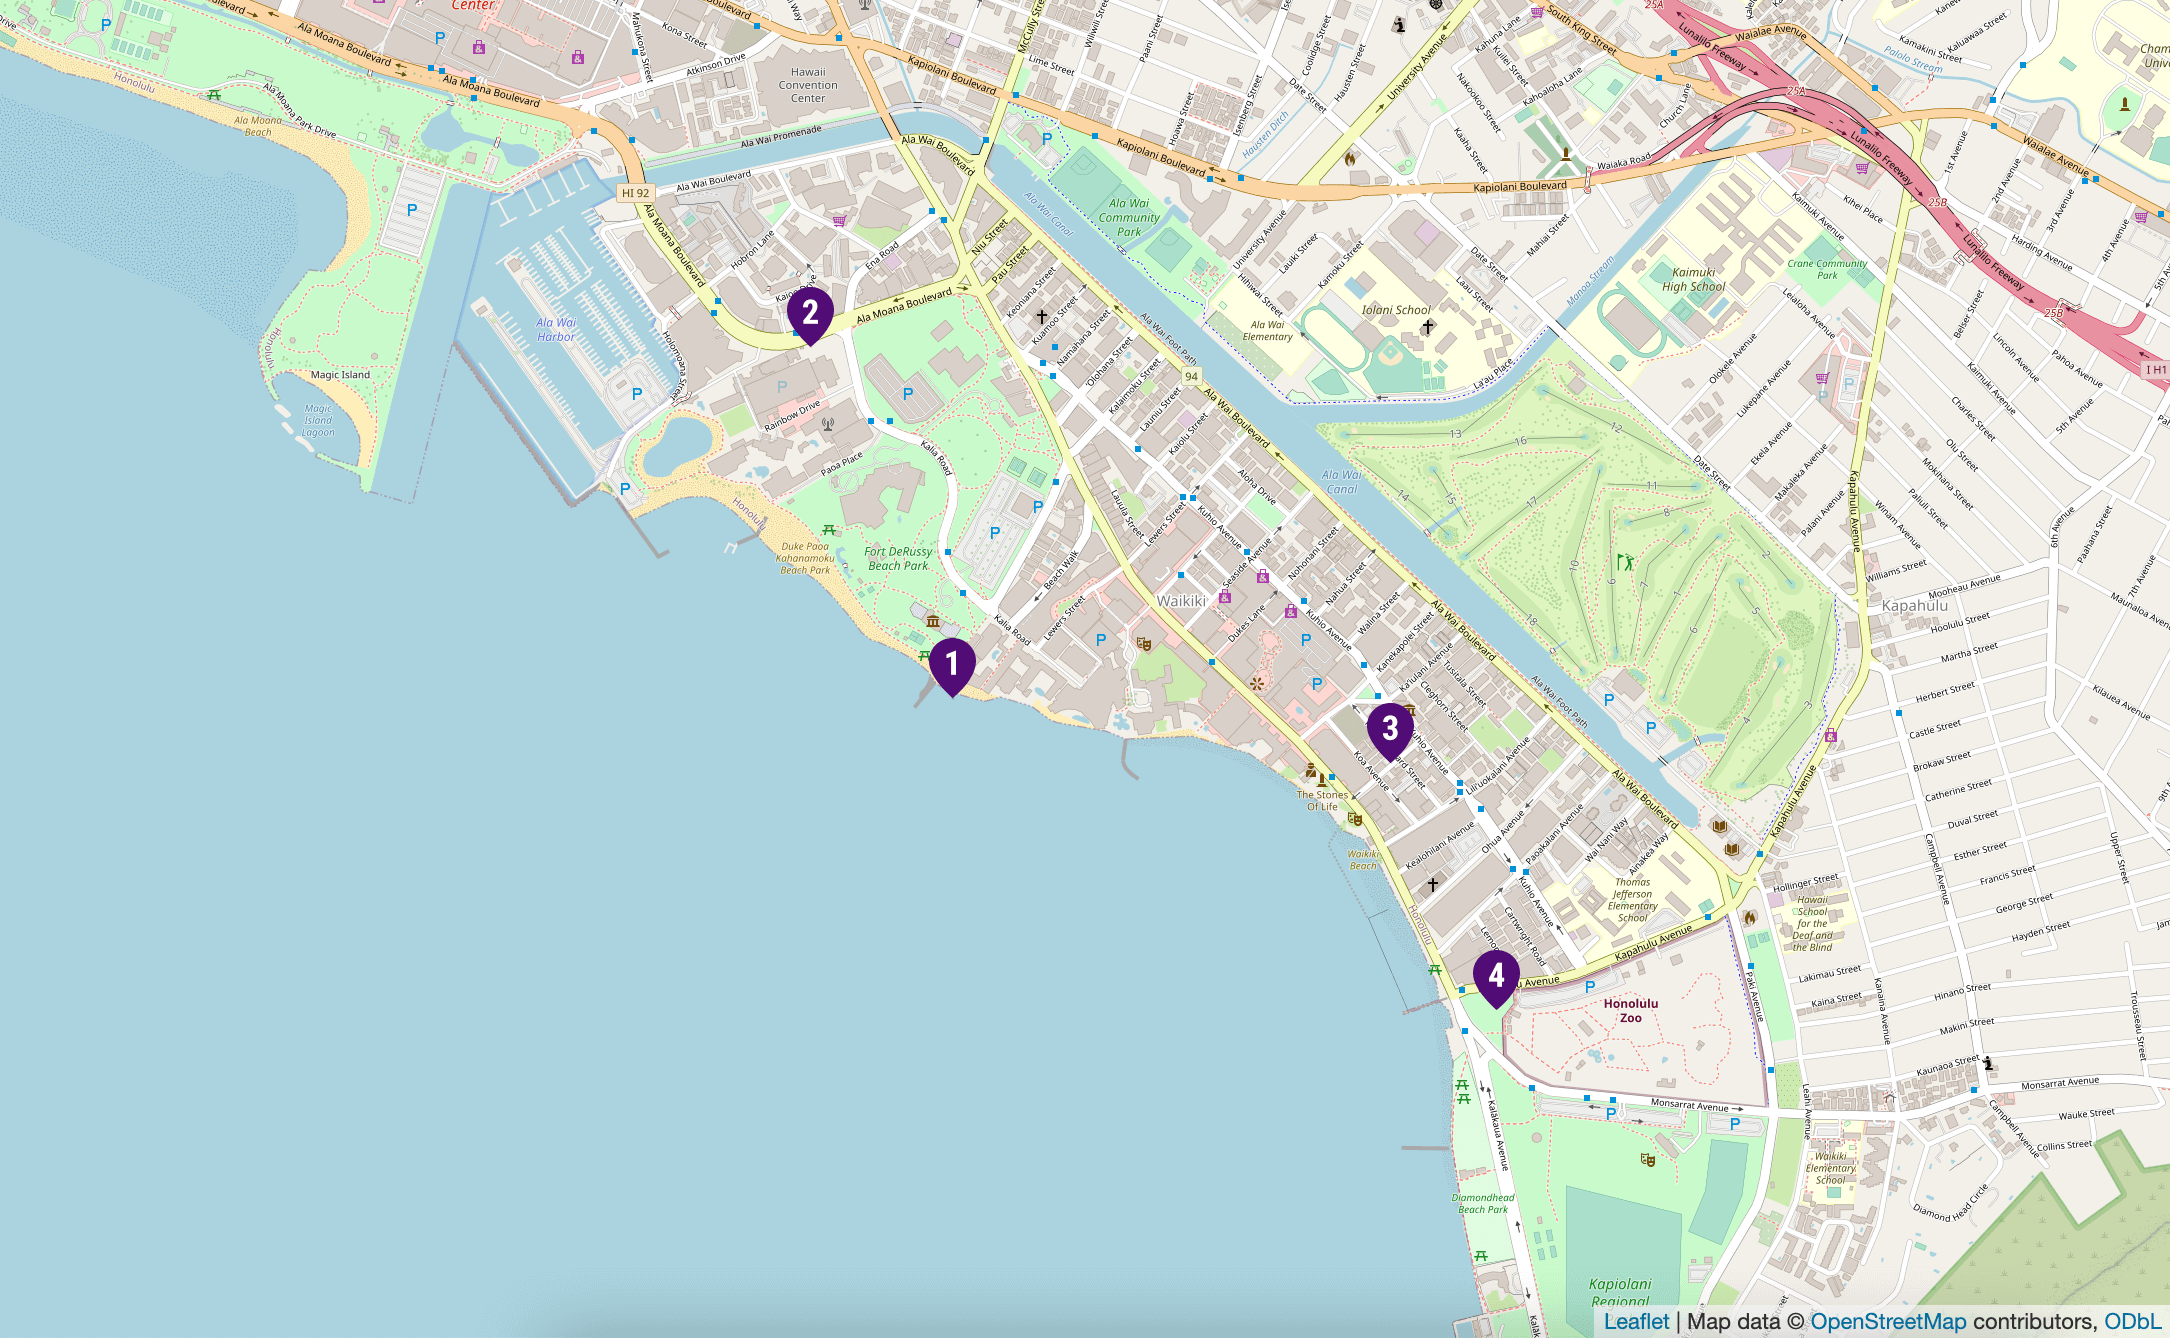 A map of Honolulu showing GoVibe’s transportation service areas near the airport